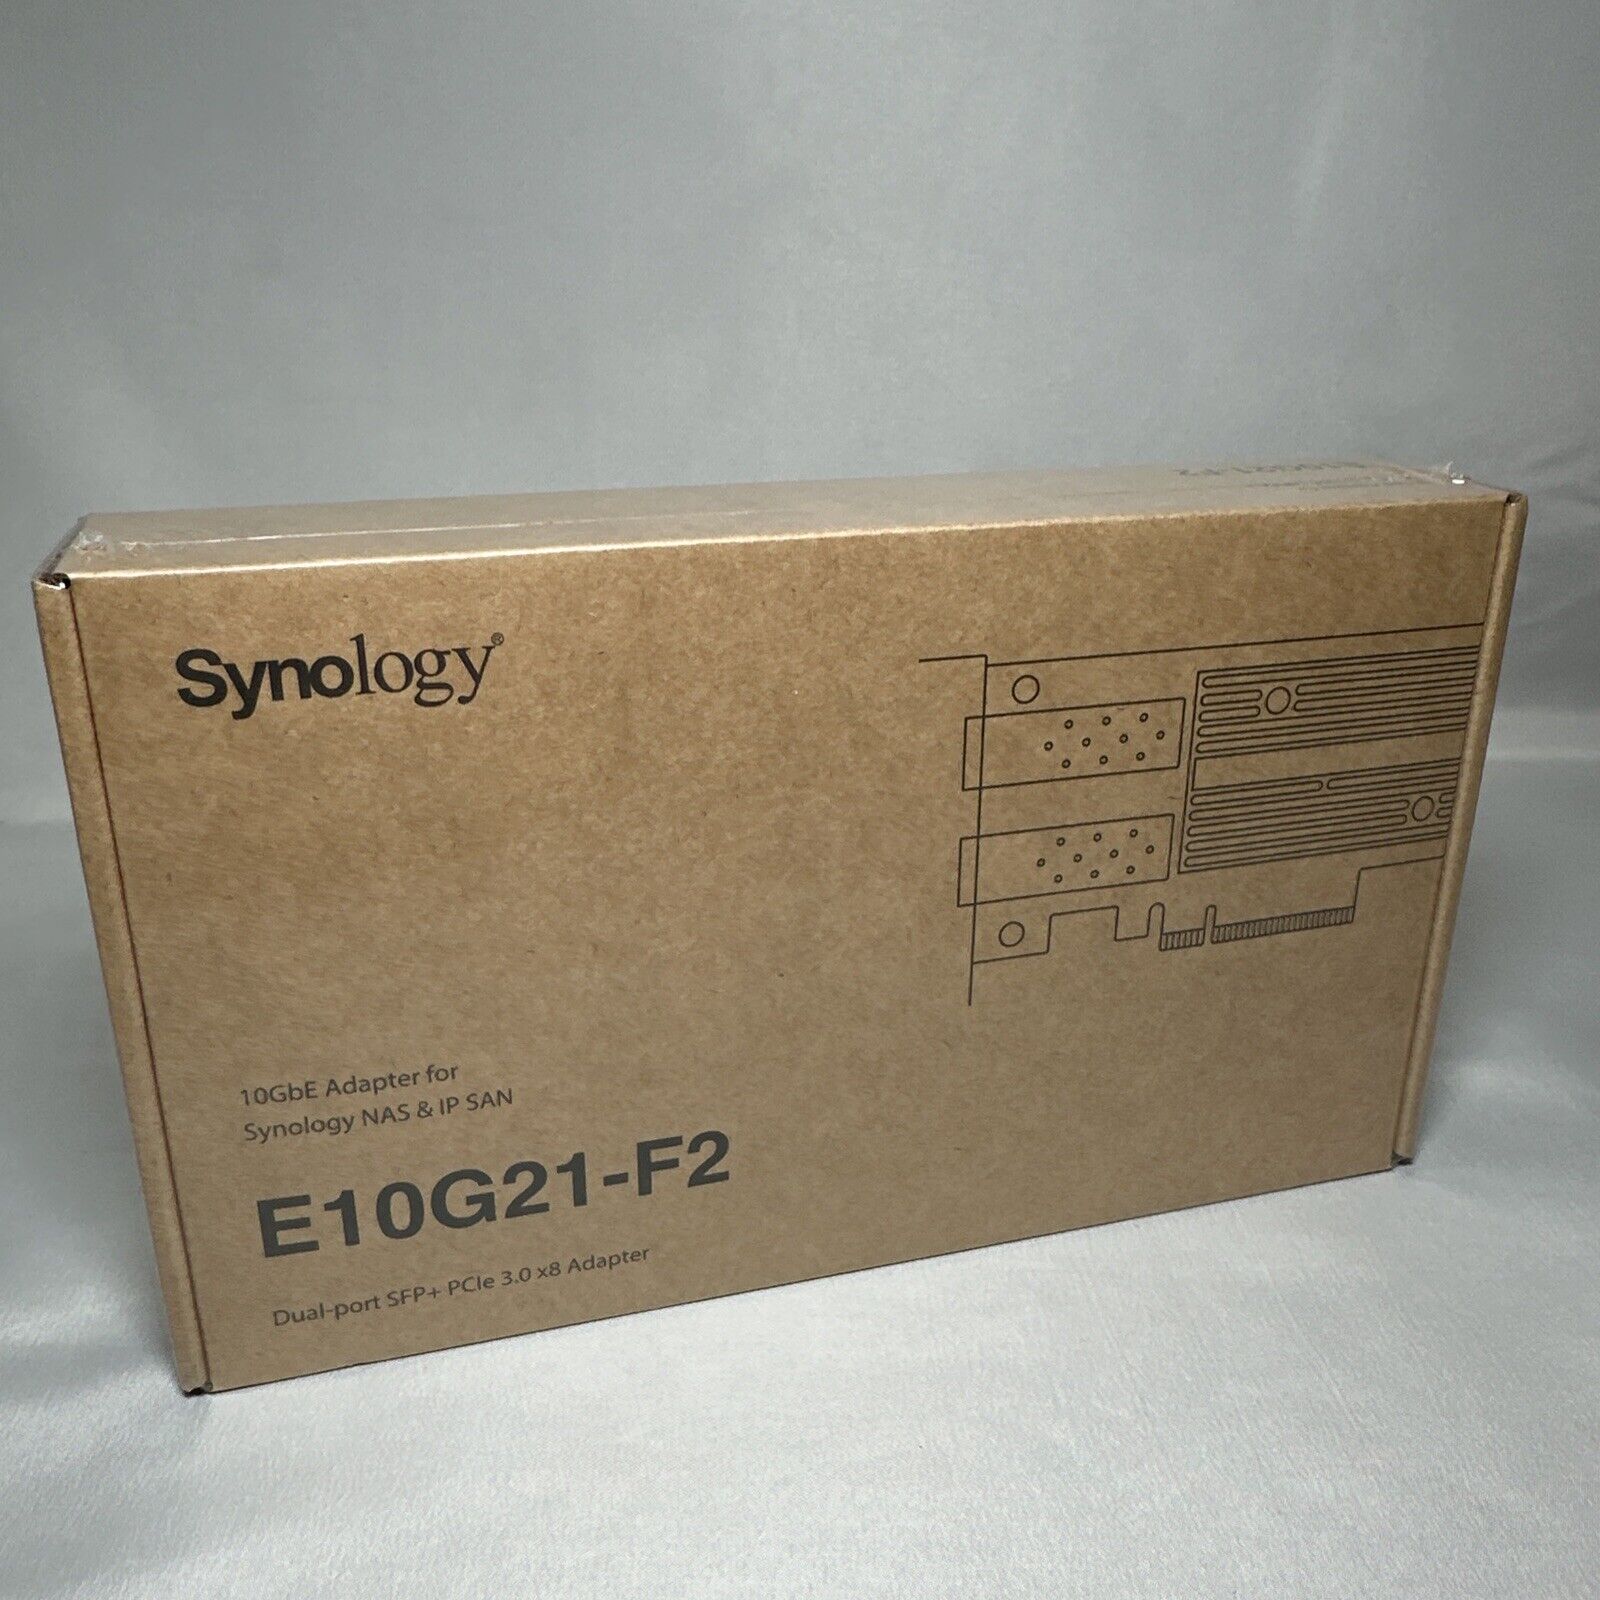 Synology Dual Port 10Gb Ethernet Adapter 2 SFP+ Ports E10G21-F2 - NEW